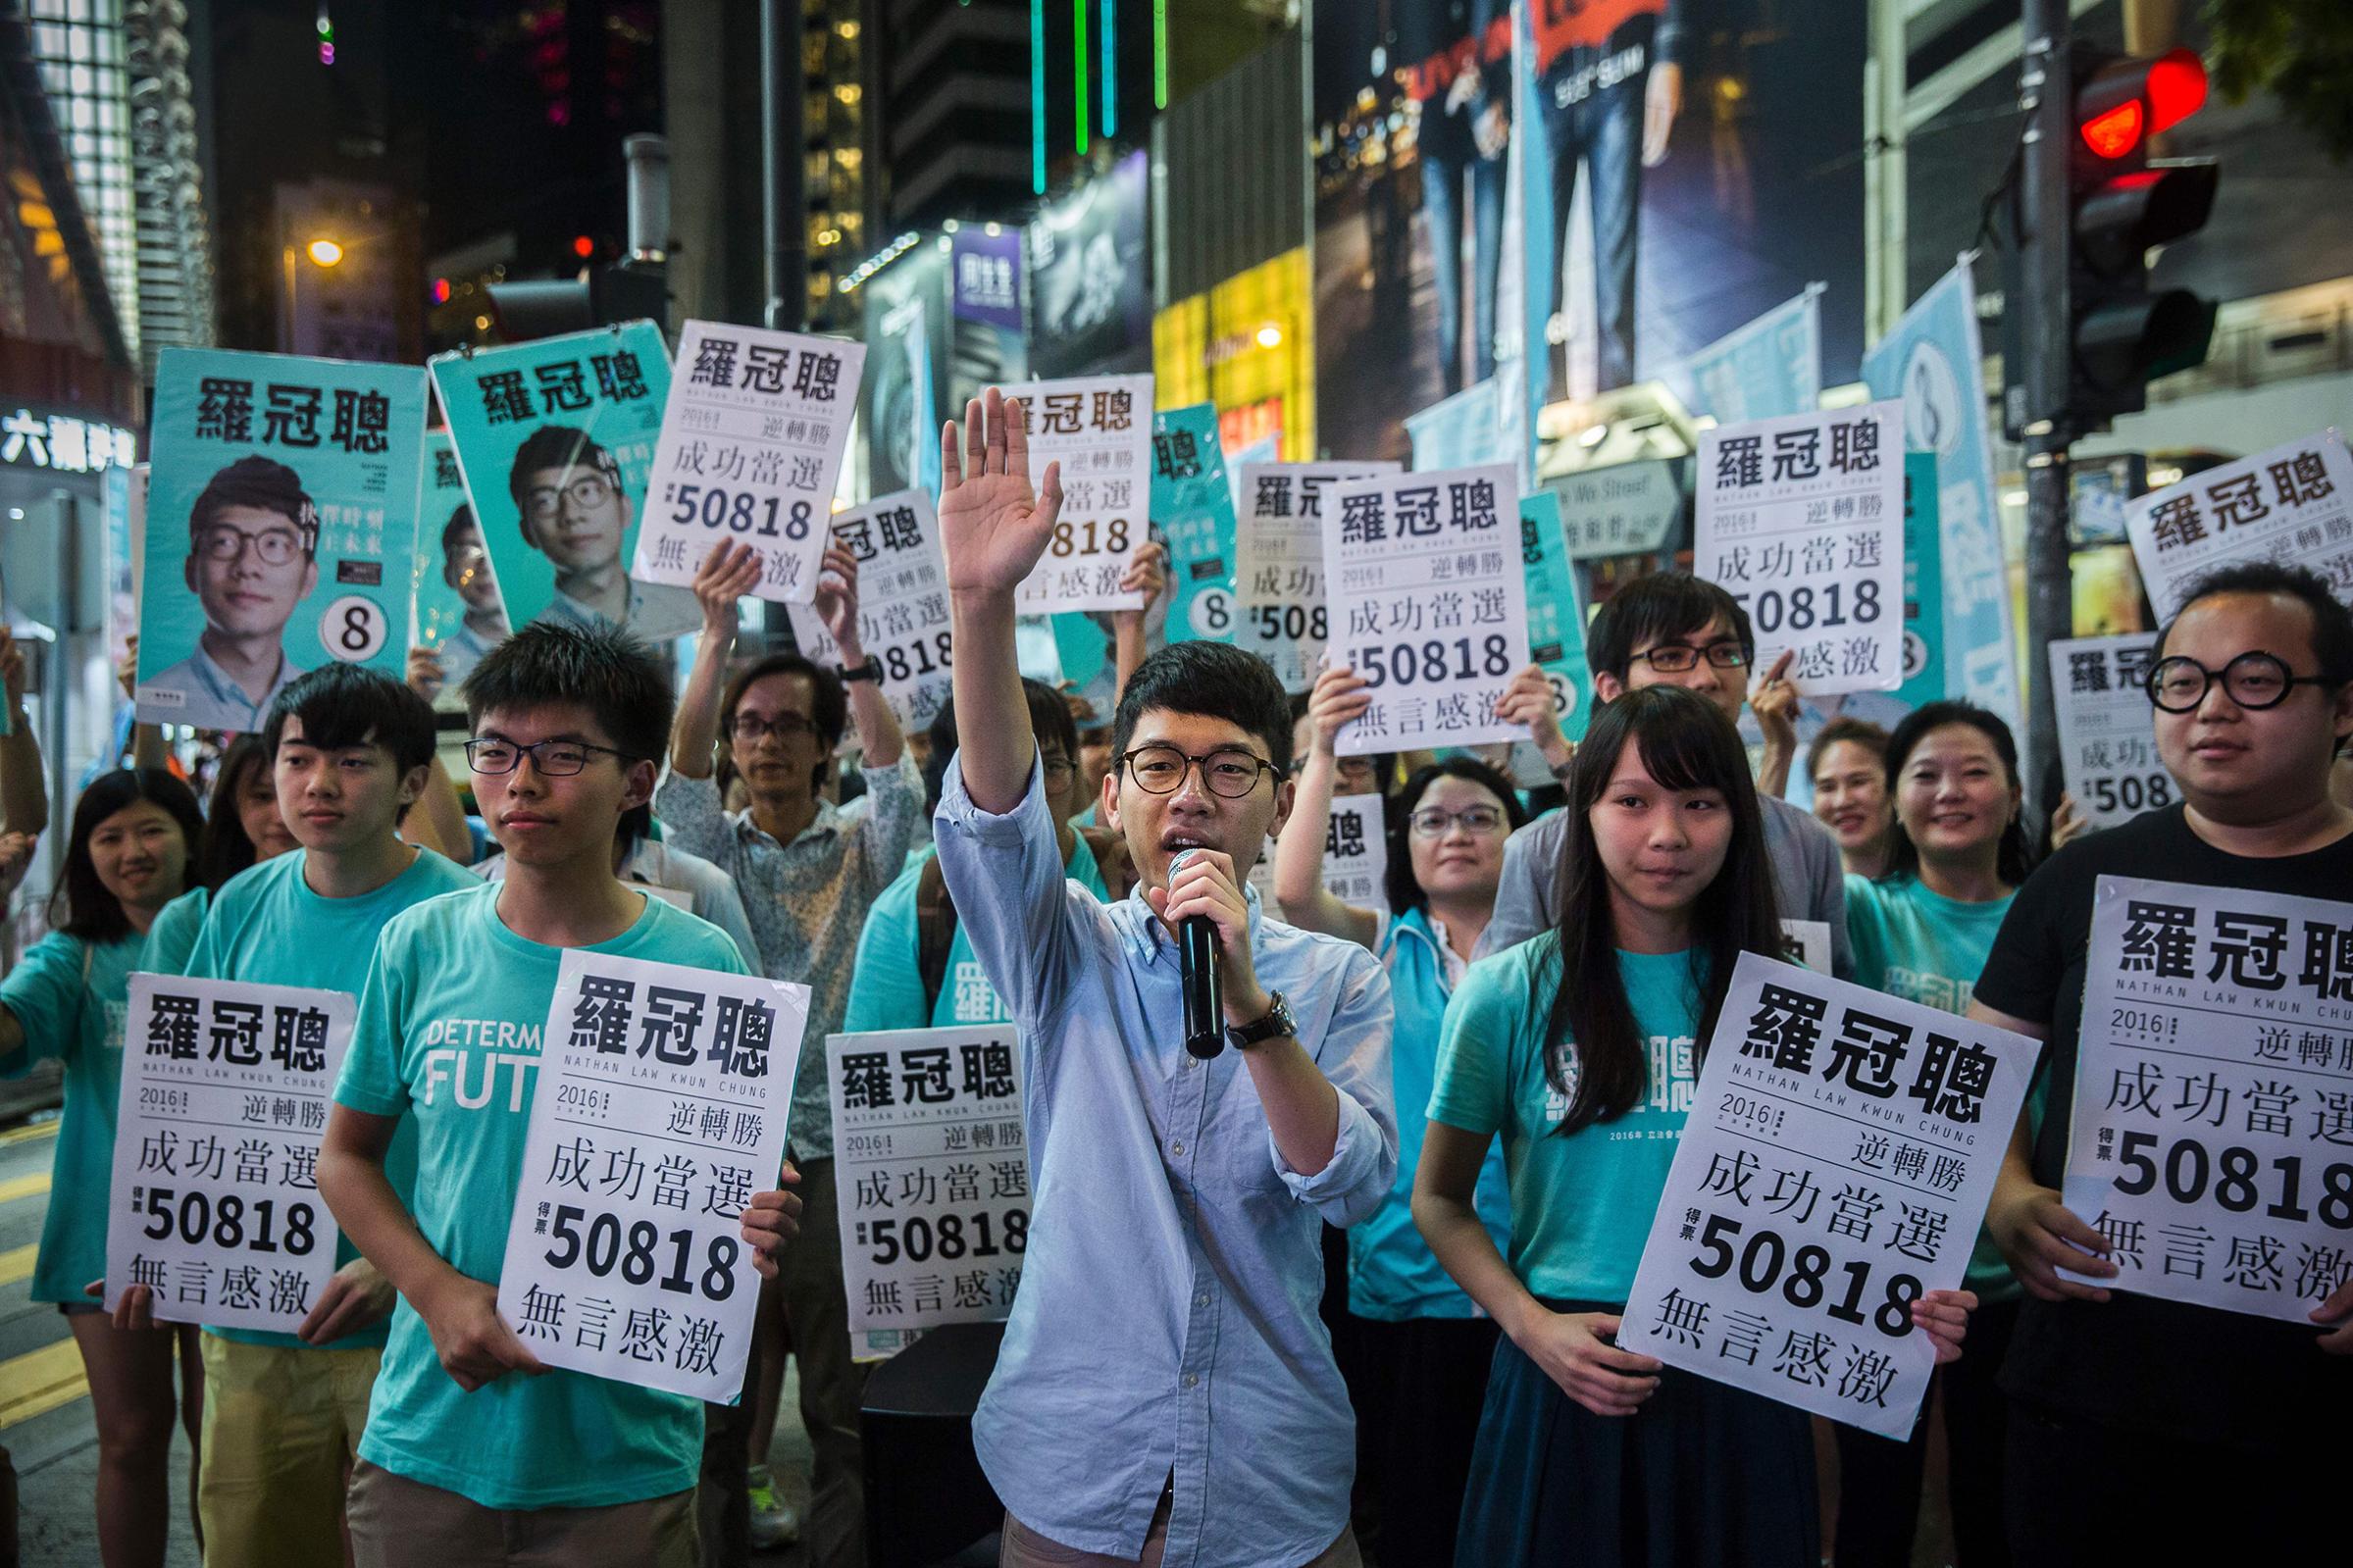 Nathan Law, center, speaks at a rally with Jousha Wong, to his right, and supporters in Causeway Bay following Law's win in the Legislative Council election in Hong Kong on Sept. 5, 2016. A new generation of young Hong Kong politicians advocating a break from Beijing looked set to become lawmakers for the first time in the biggest poll since mass pro-democracy rallies in 2014.